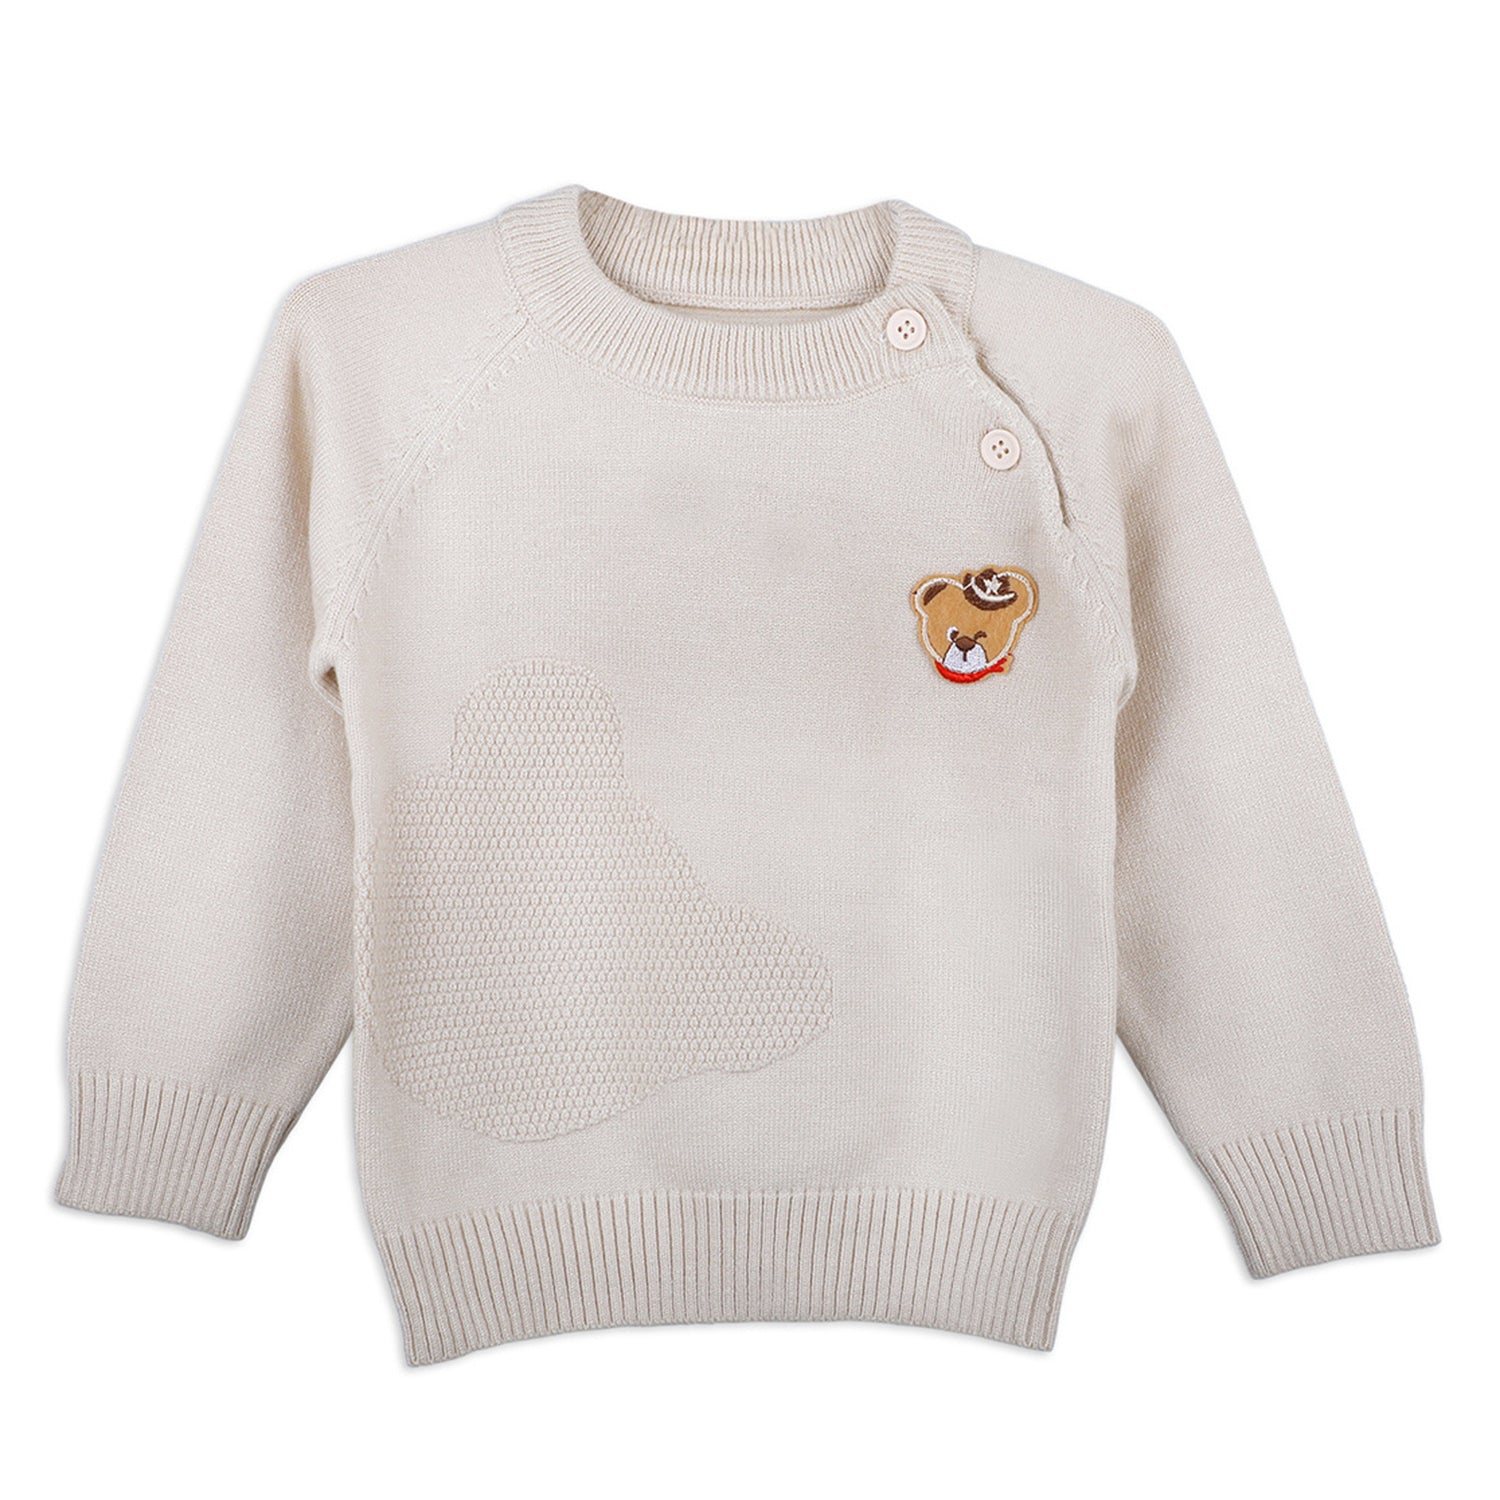 Bear Embroidery Premium Full Sleeves Knitted Sweater - White